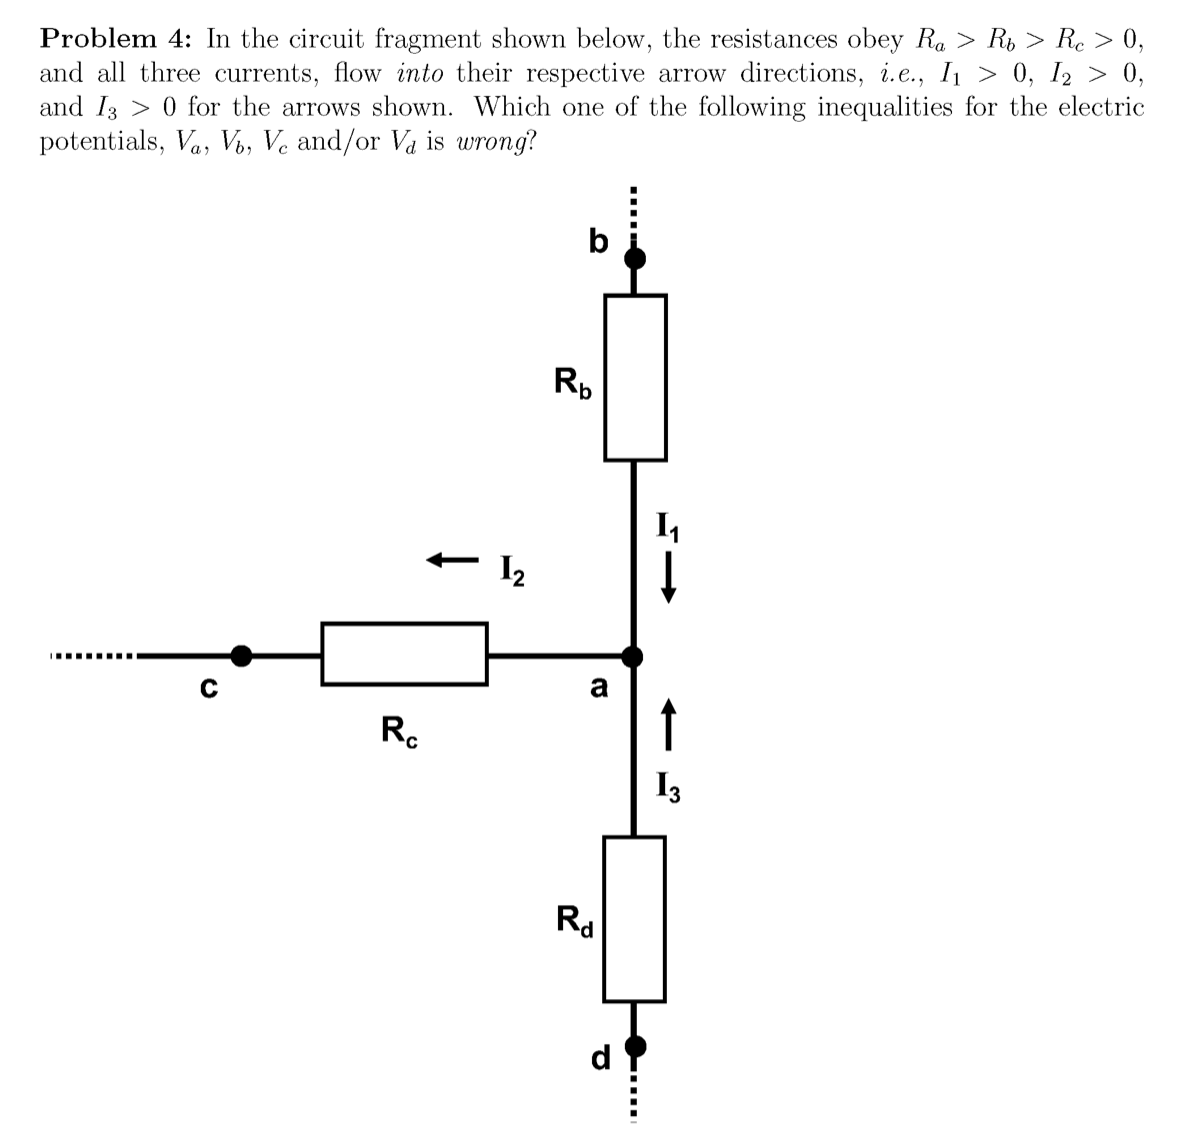 Problem 4: In the circuit fragment shown below, the resistances obey Ra > R, > Re > 0,
and all three currents, flow into their respective arrow directions, i.e., I > 0, I2 > 0,
and I3 > 0 for the arrows shown. Which one of the following inequalities for the electric
potentials, Va, V, Ve and/or Va is wrong?
Rp
I2
I.... ....
R.
↑
I3
Rd
